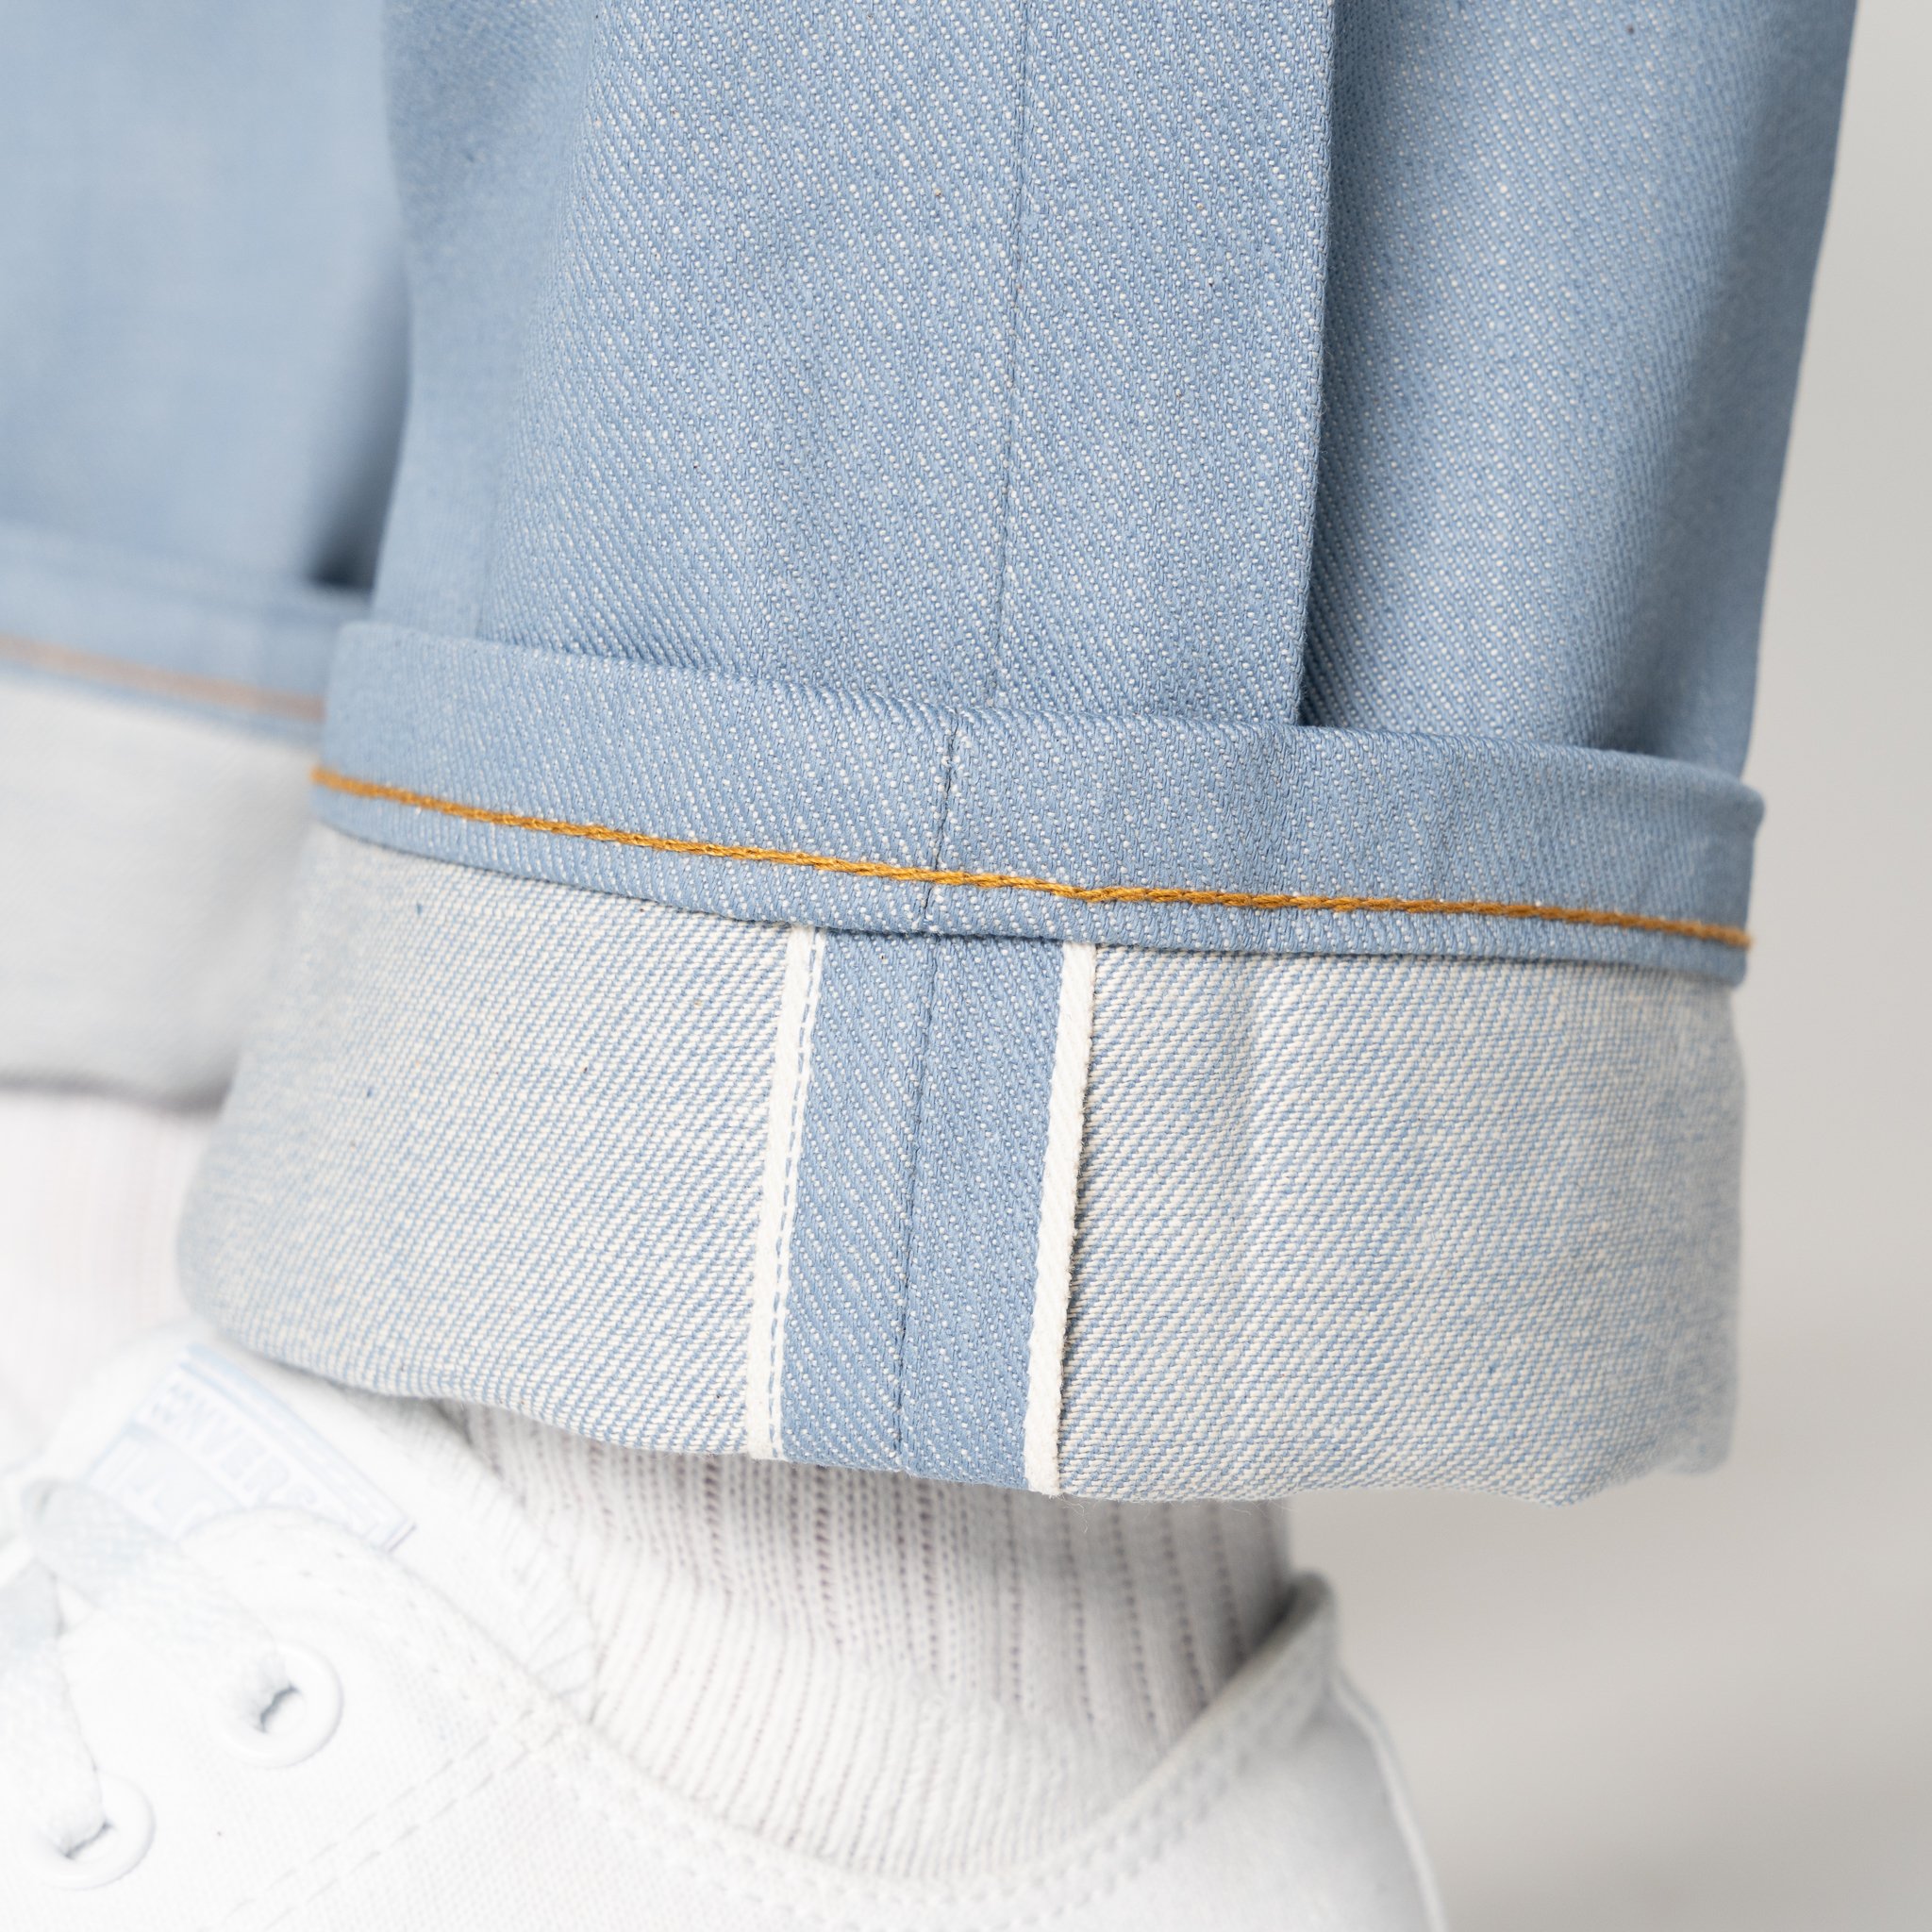  Left Hand Twill Selvedge - Sky Blue Edition jeans 